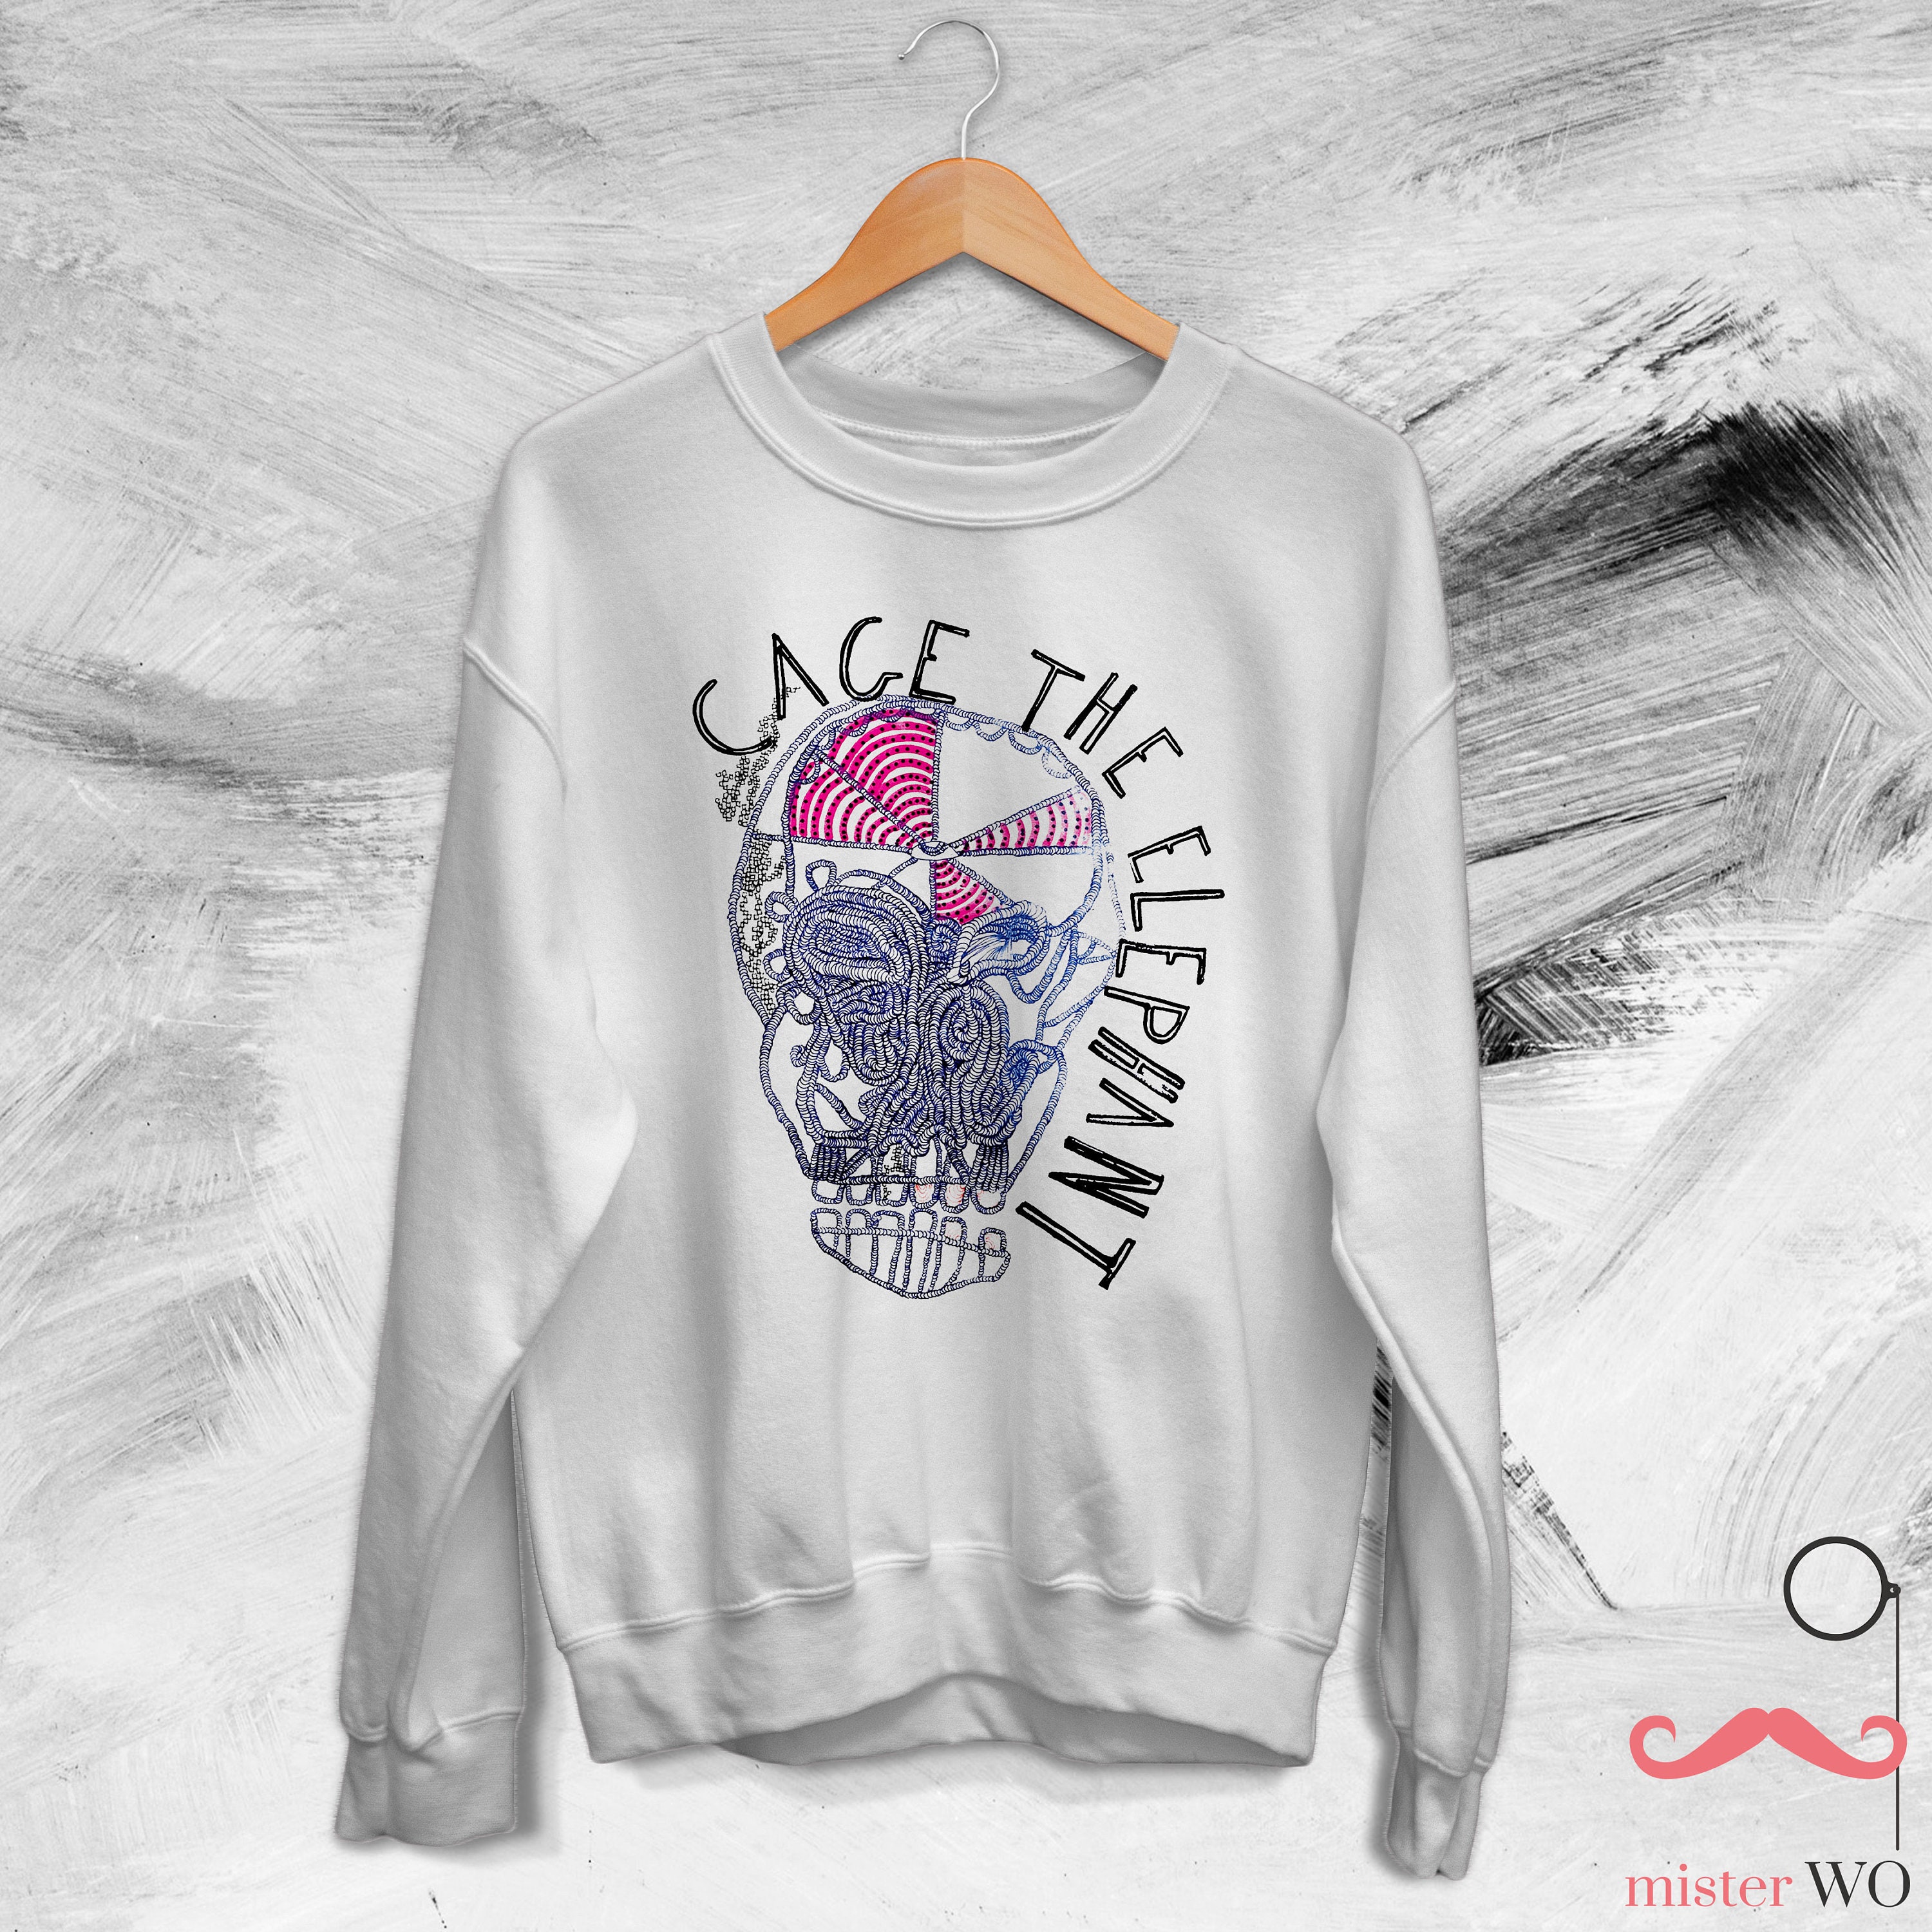 Discover Cage The Elephant Album Cover Sweatshirt - Cage The Elephant